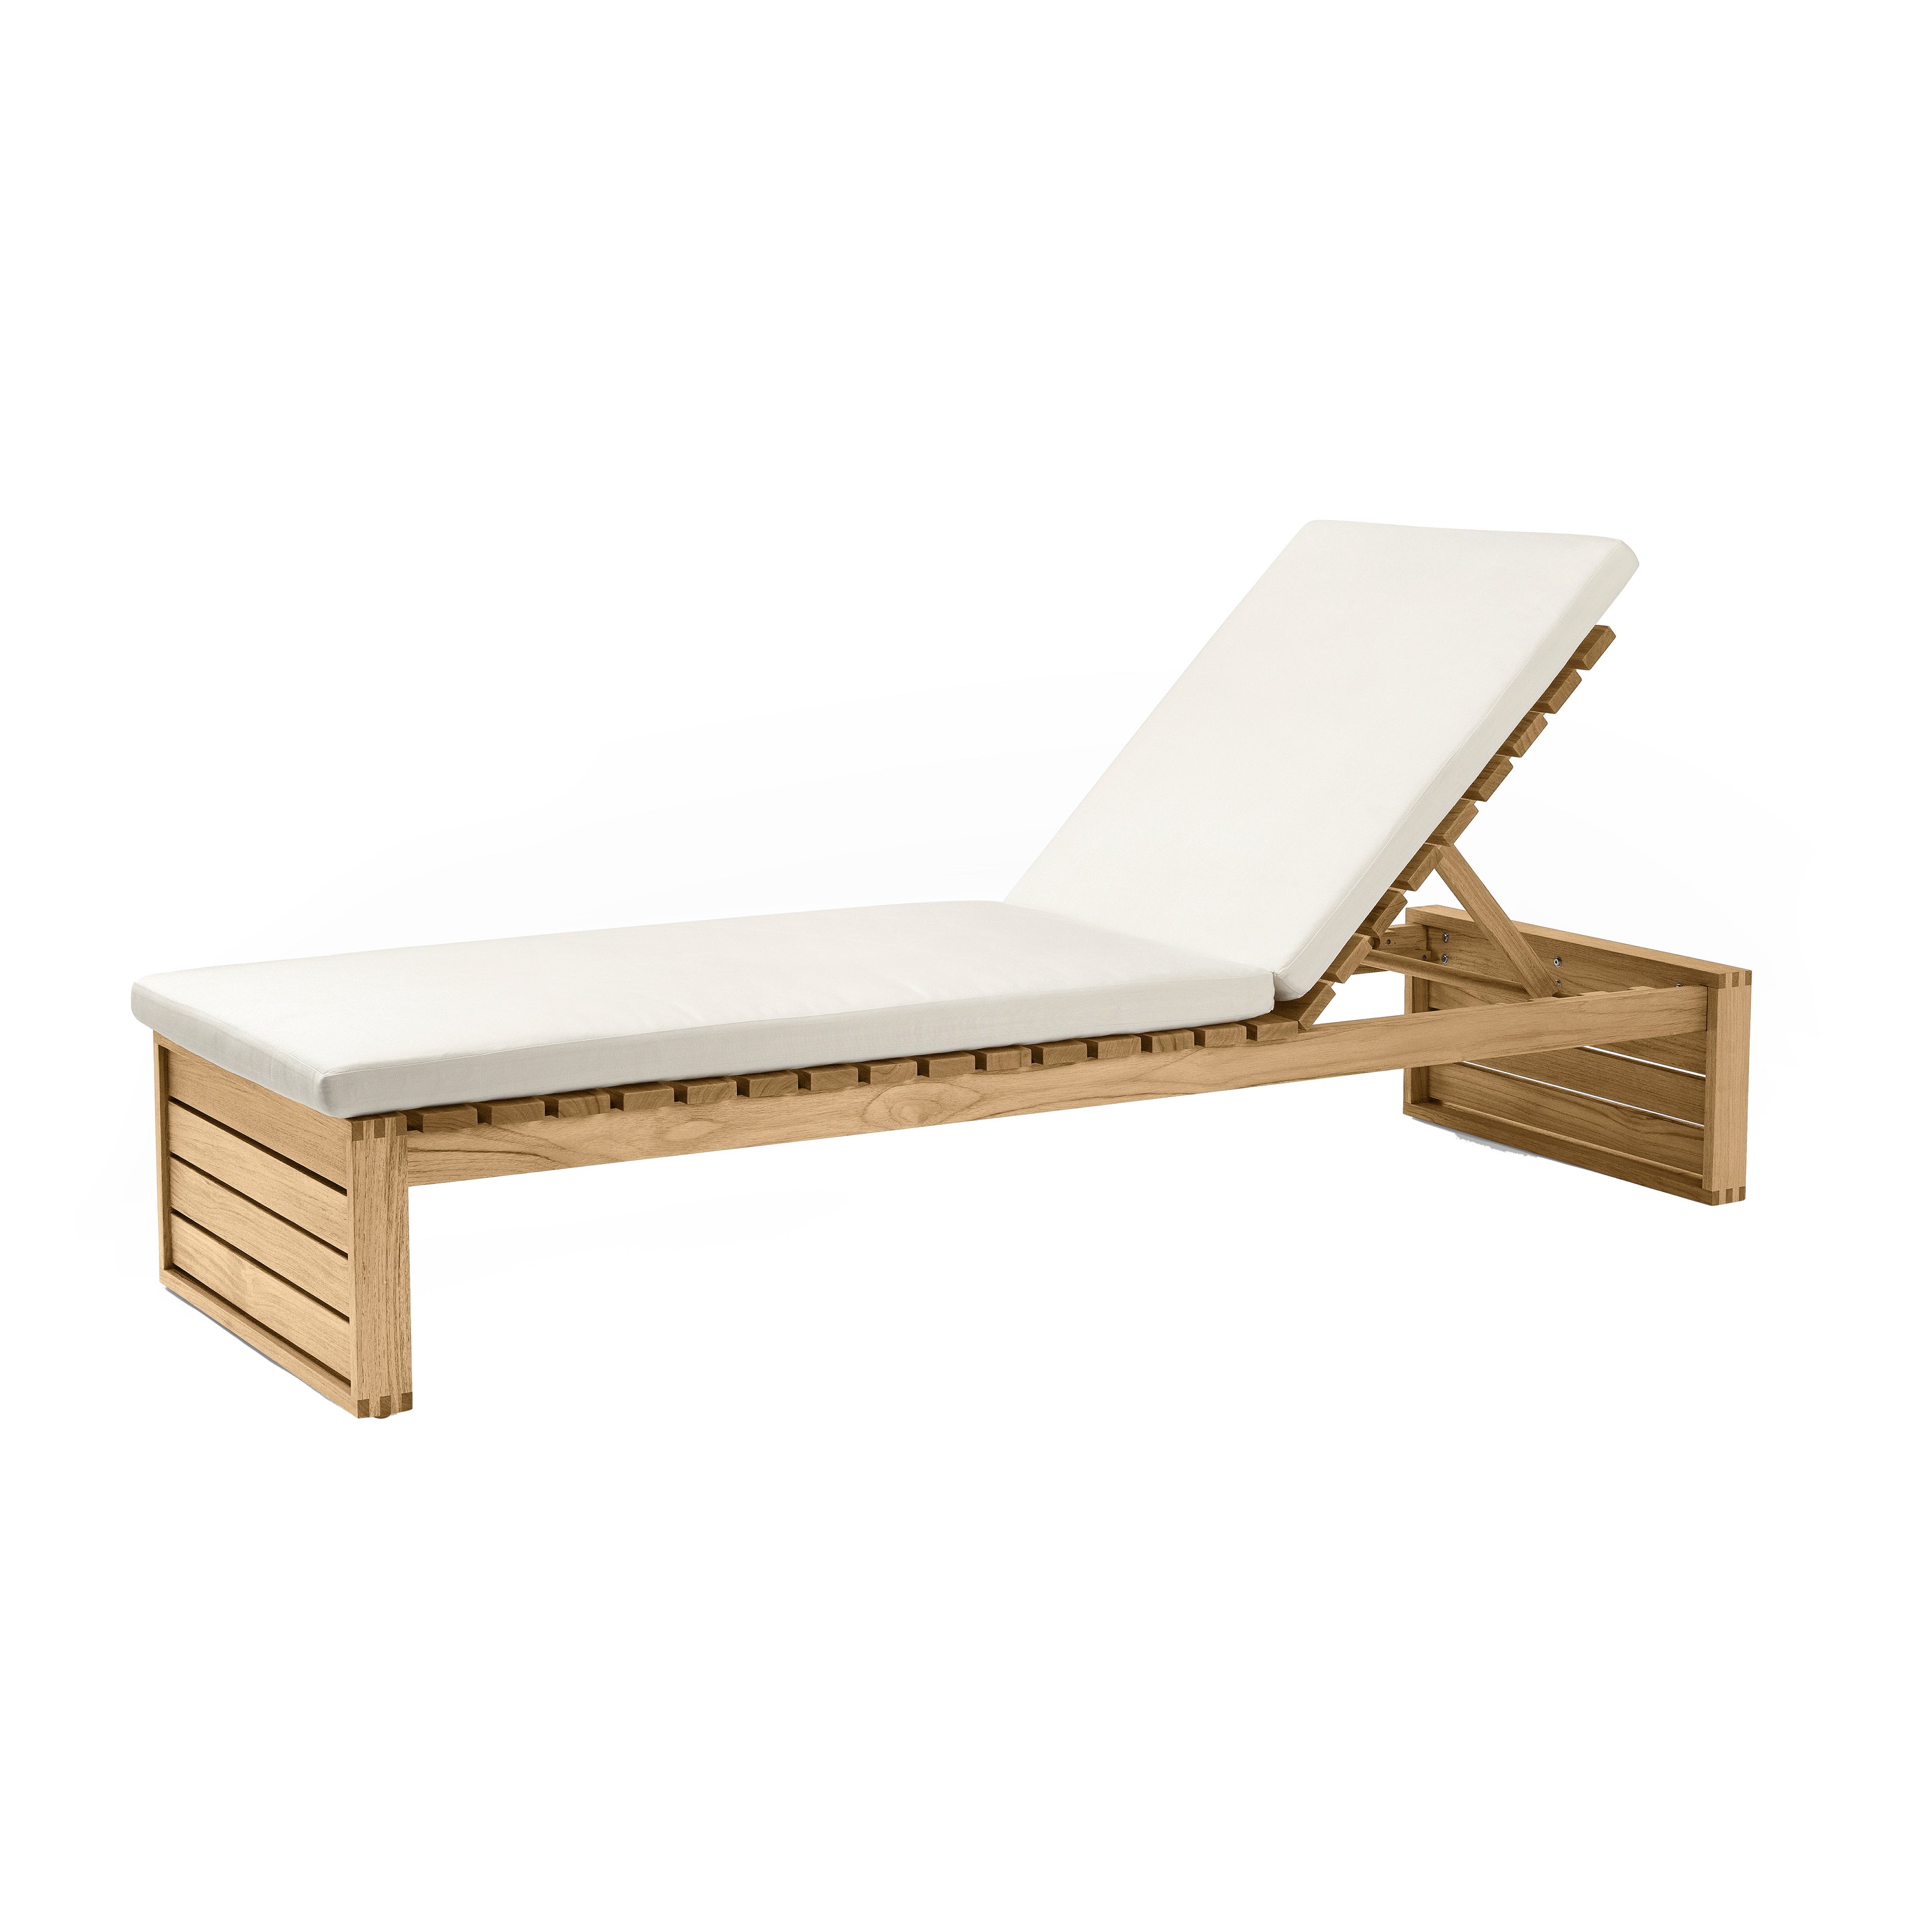 BK14 Outdoor Sunbed: With Canvas Cushion